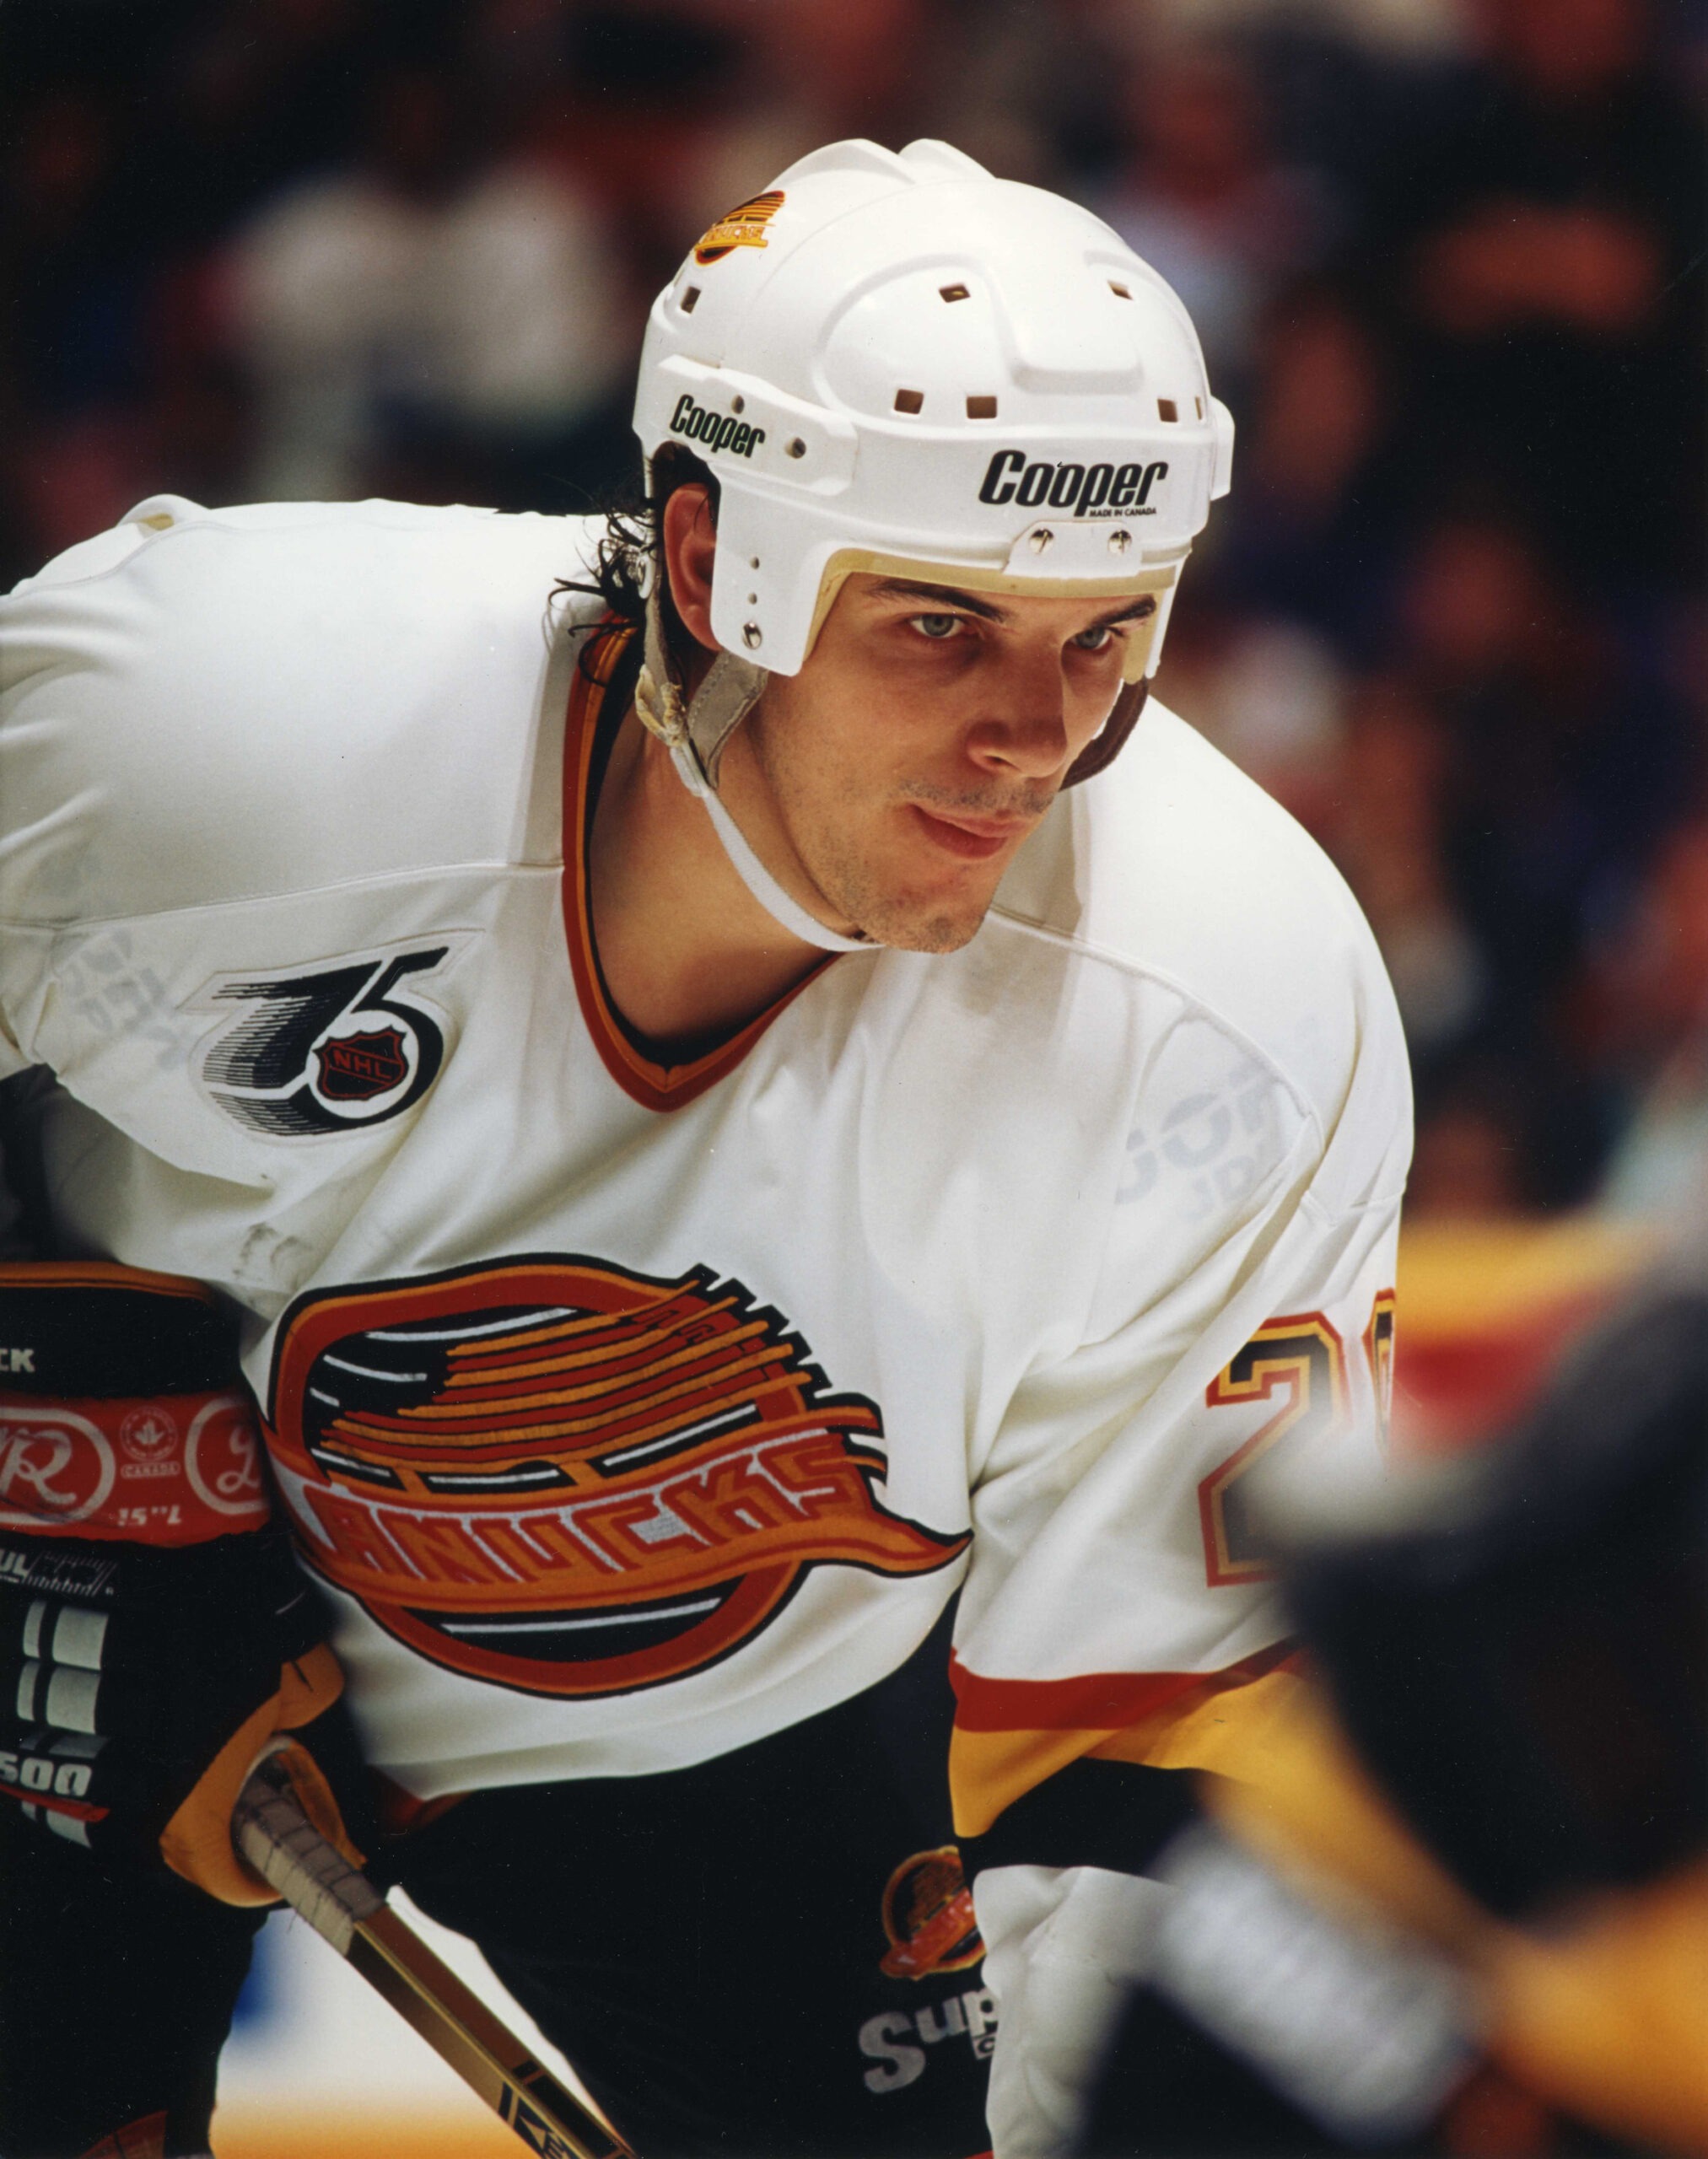 Canucks remember Gino Odjick with First Nations jersey